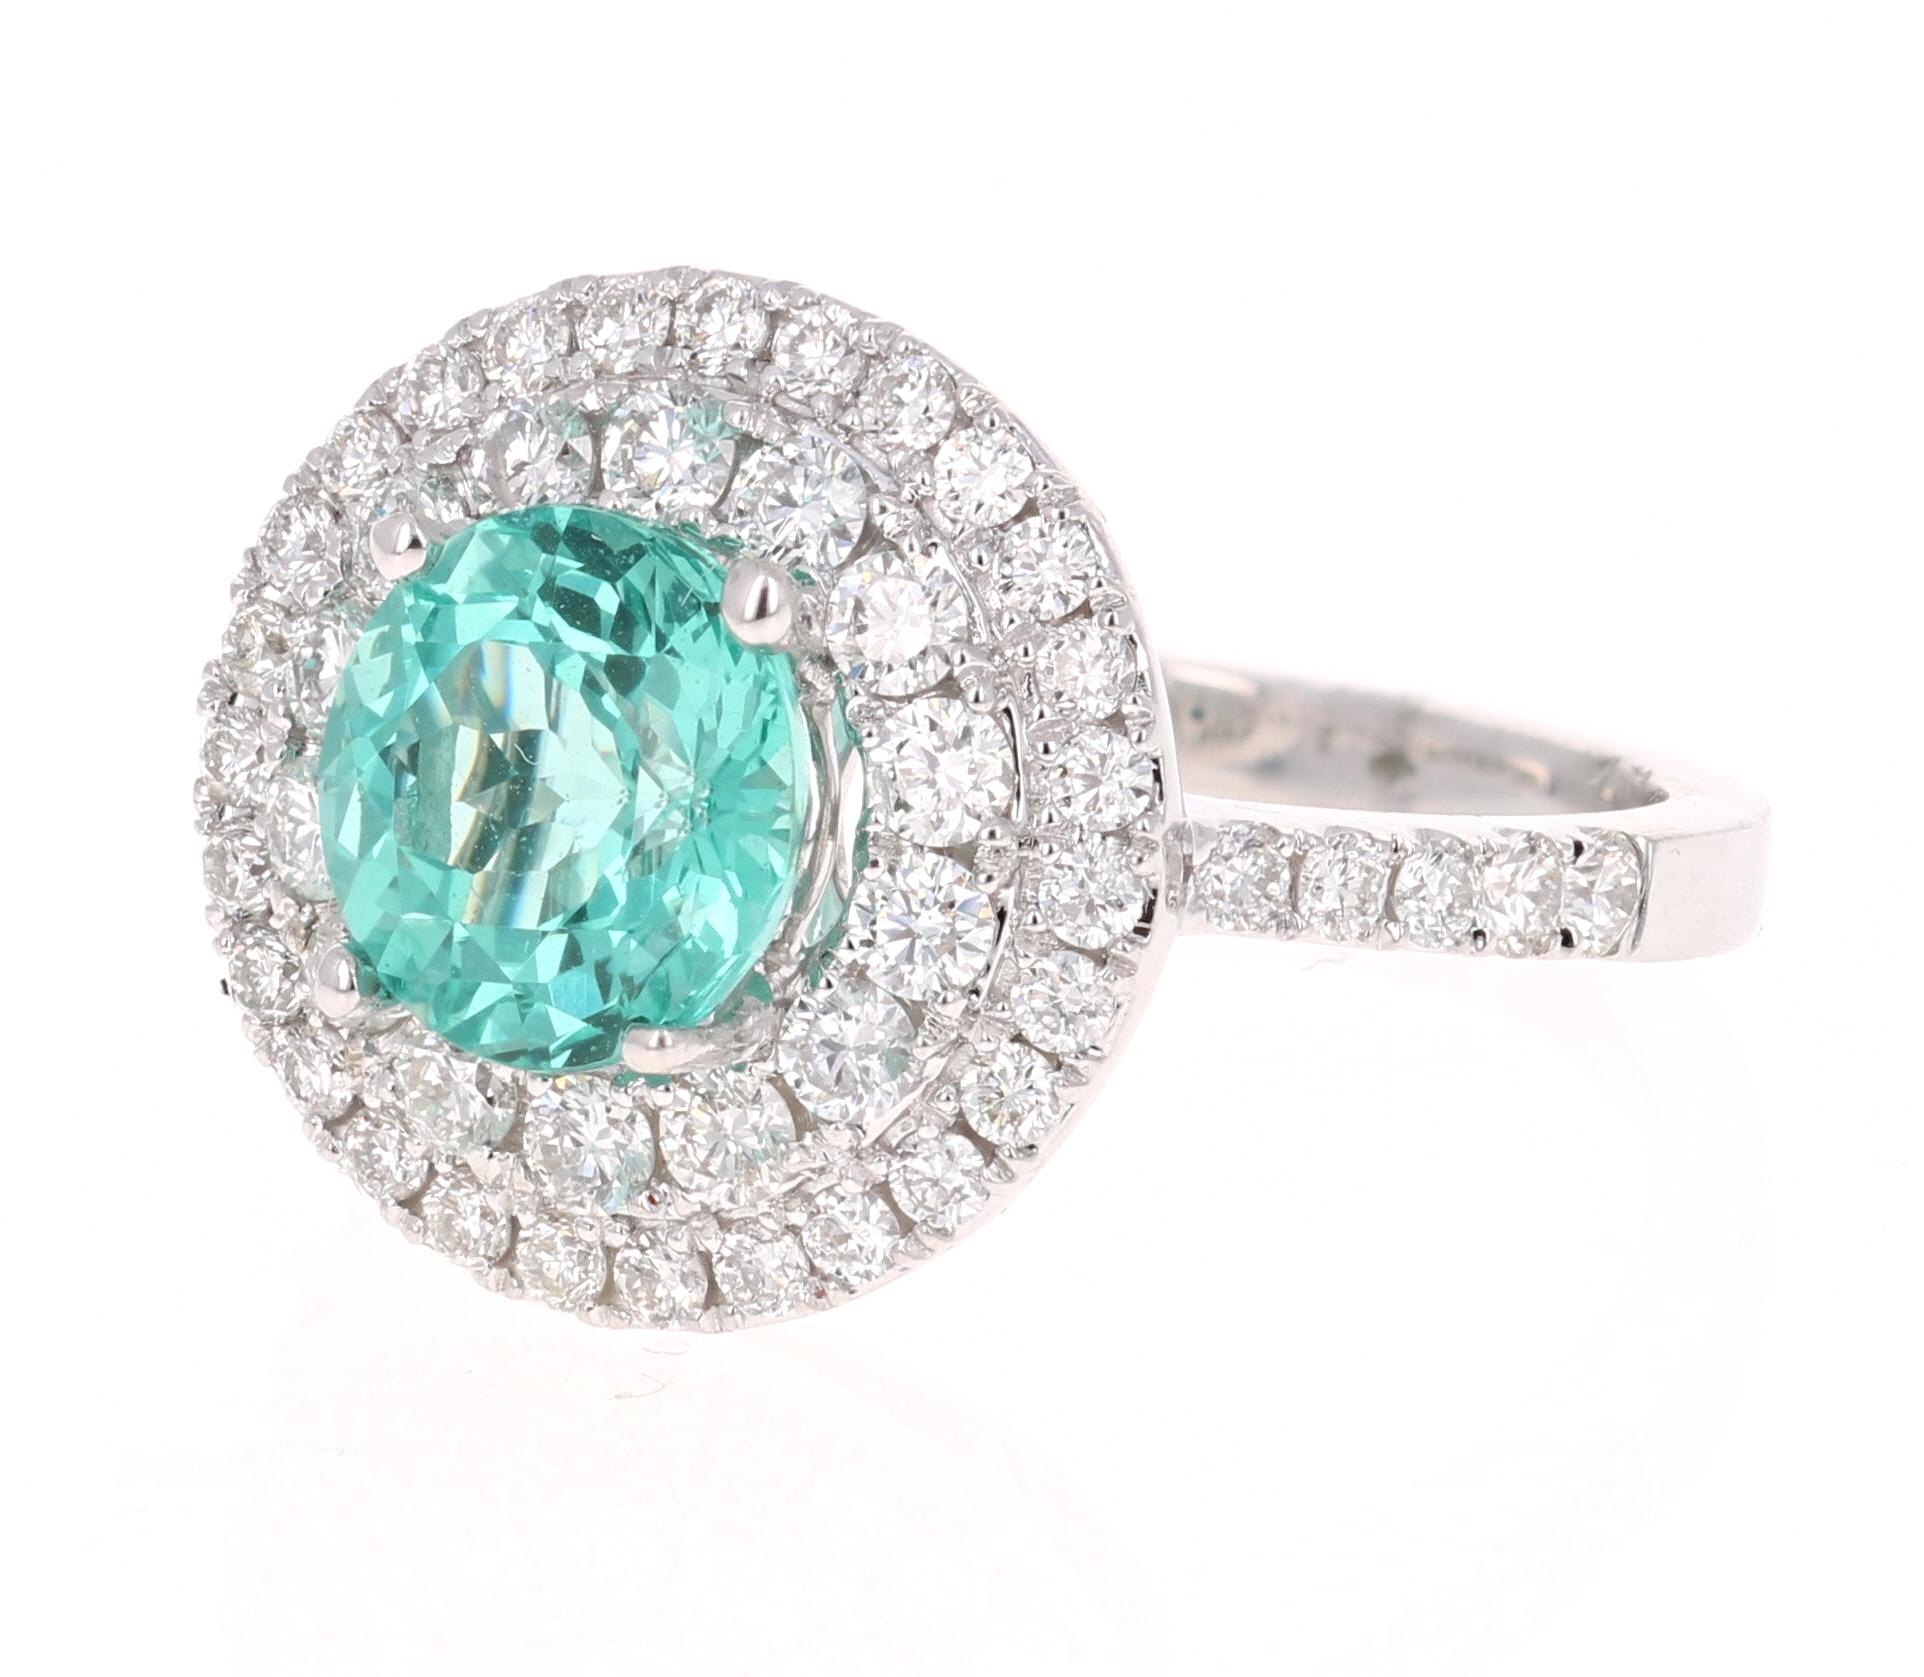 Gorgeous Double Halo Apatite and Diamond Ring.  This ring has a Round Cut 2.44 carat Apatite in the center of the ring and is surrounded by a double halo of 56 Round Cut Diamonds that weigh 0.98 carat (Clarity: SI2, Color:F).  The total carat weight